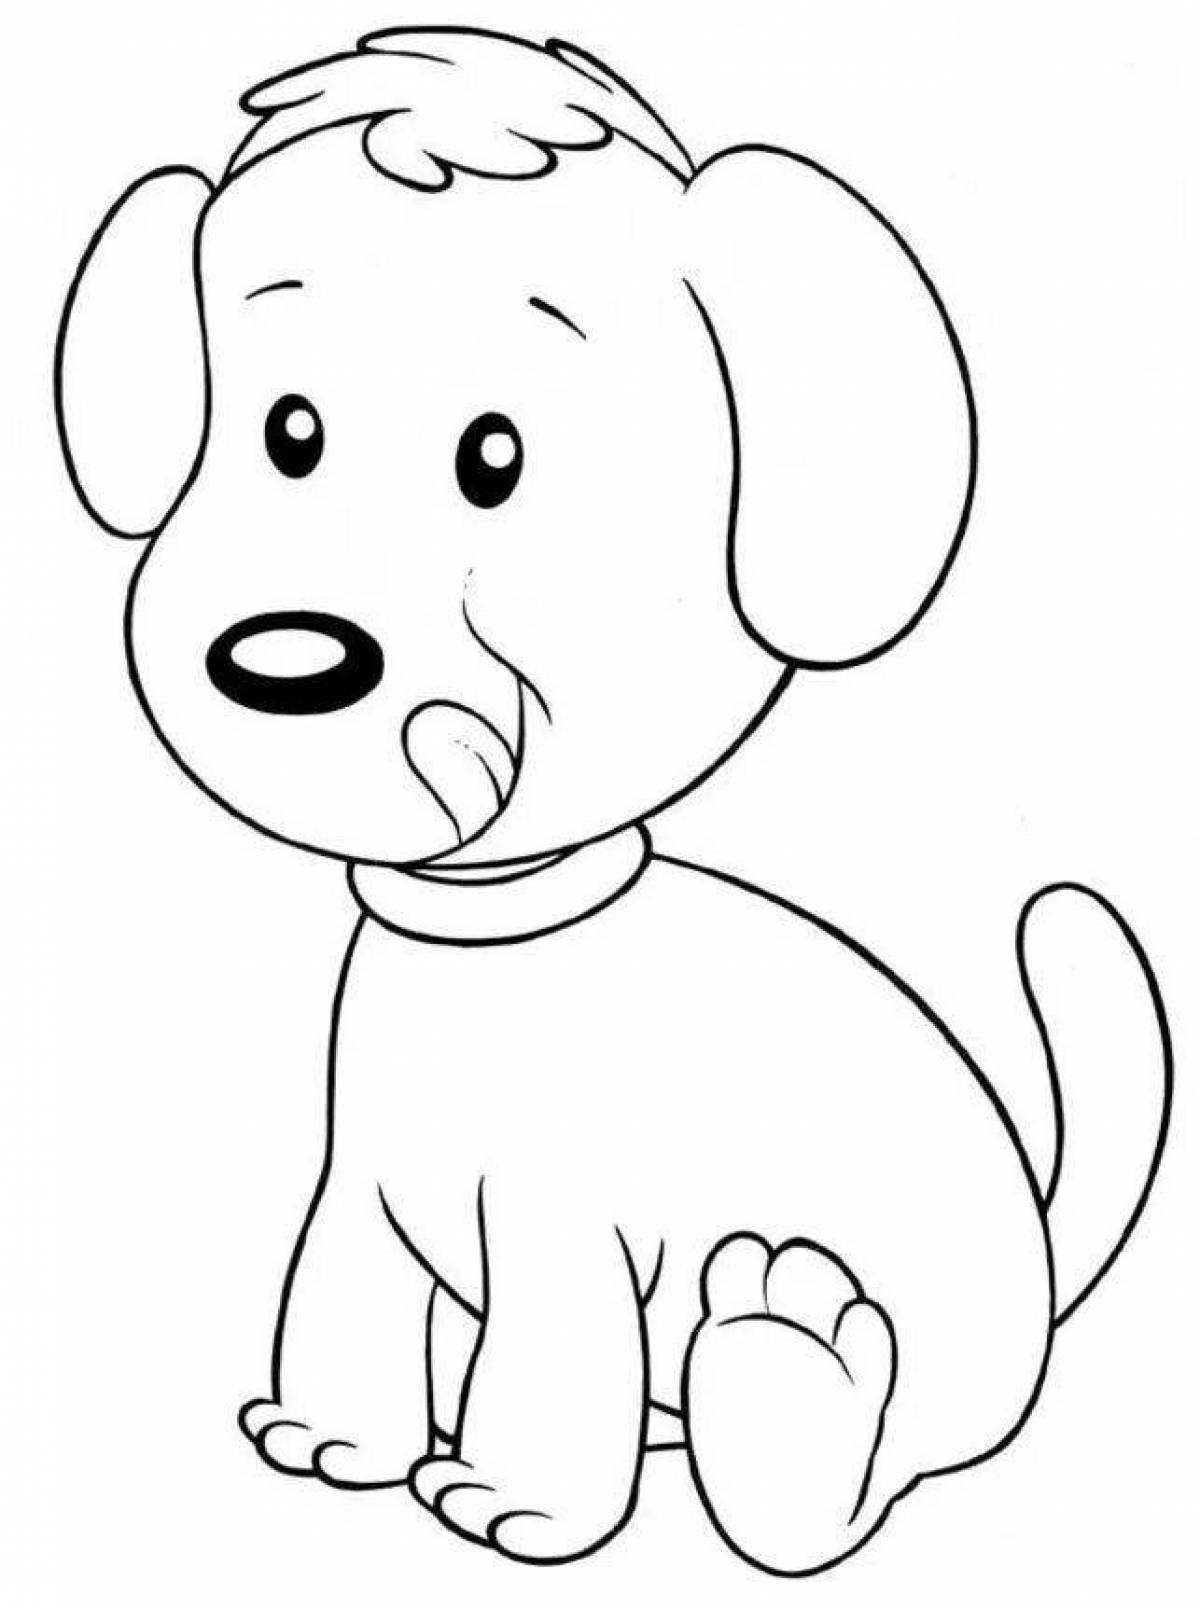 Smiling dog coloring page for kids